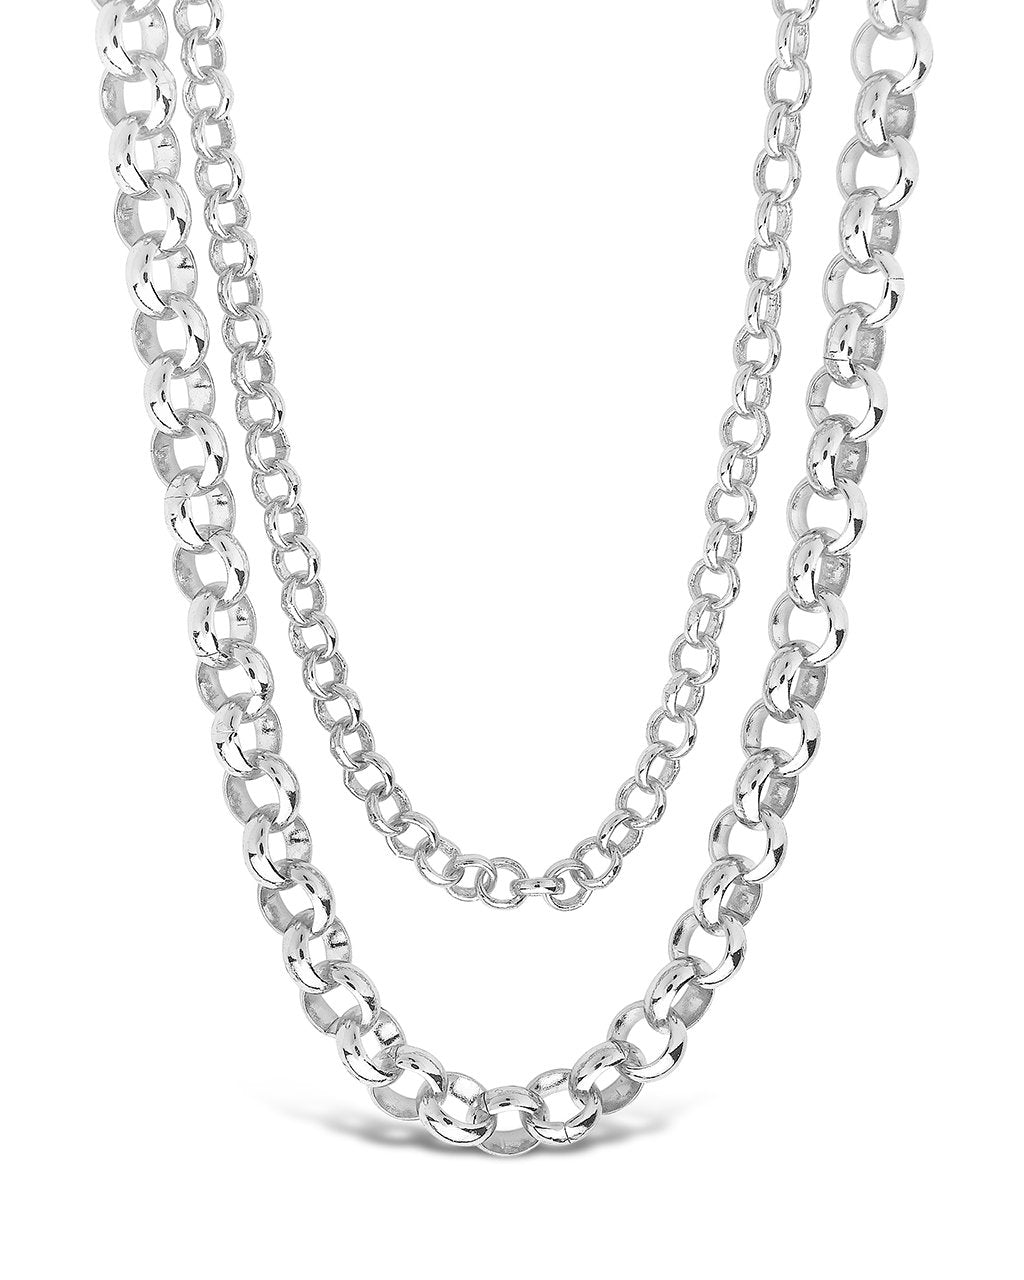 Bold Layered Rolo Chain Necklace Necklace Sterling Forever Silver 